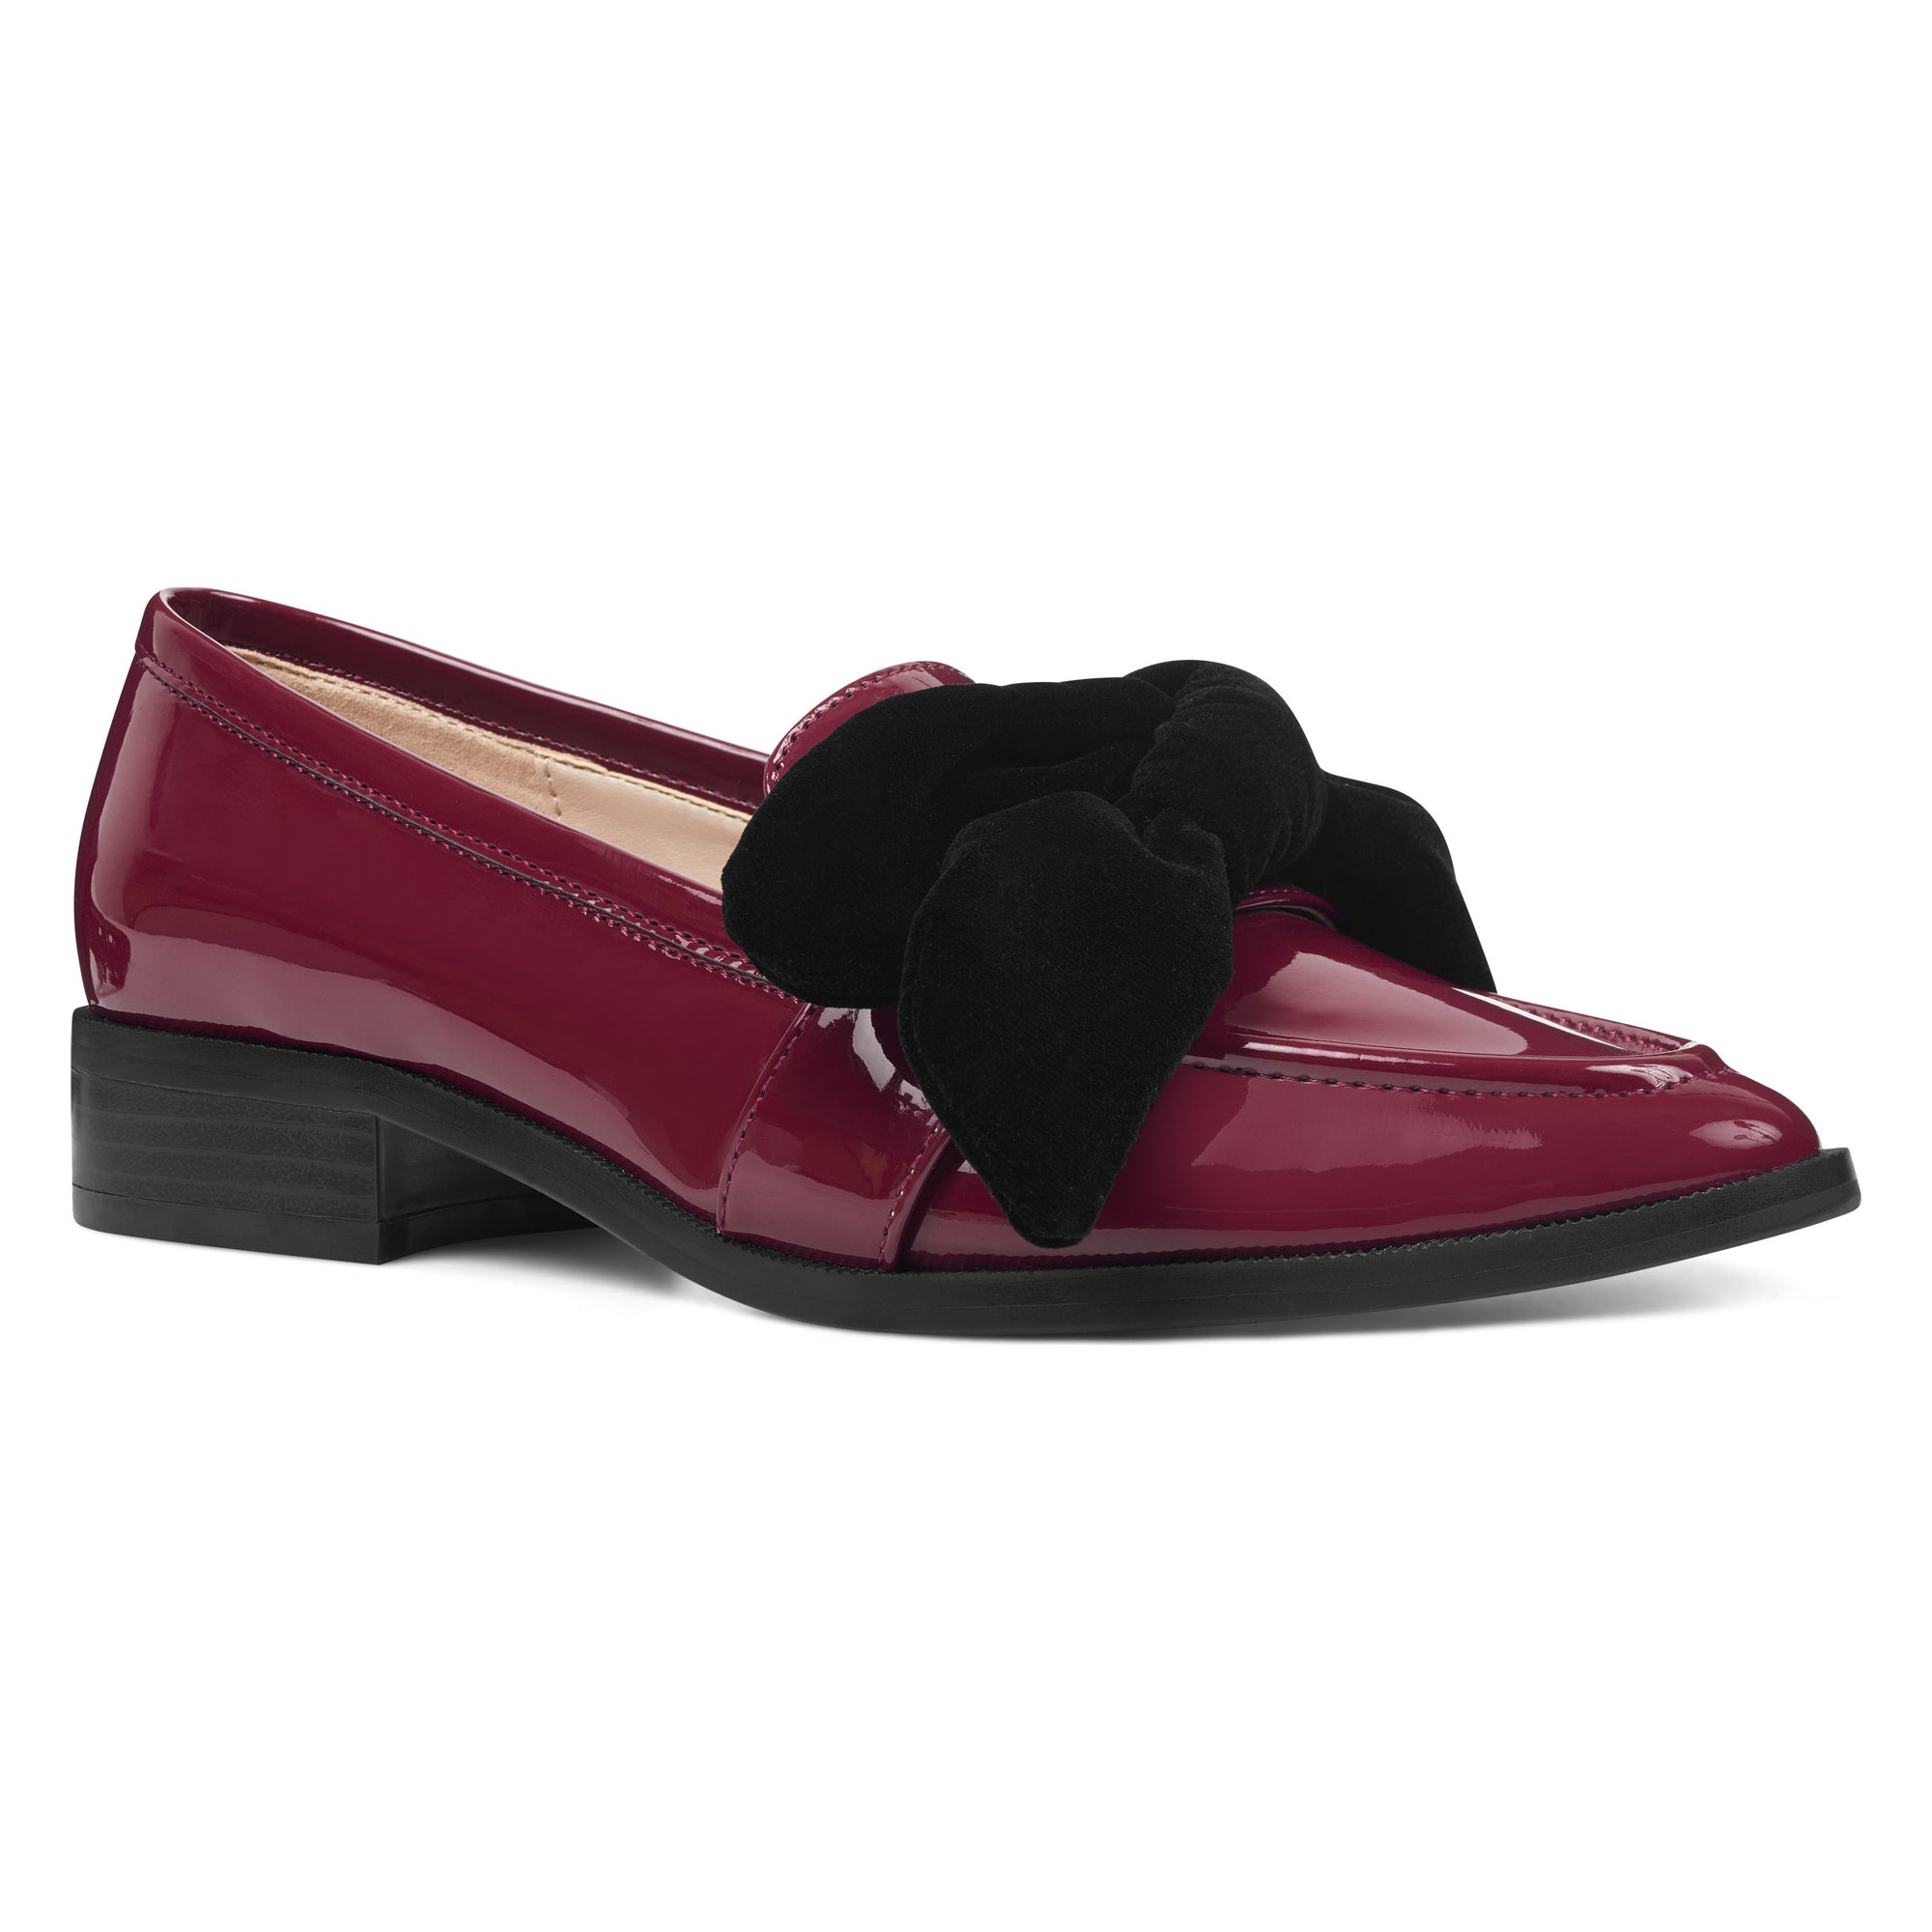 weeping bow loafers